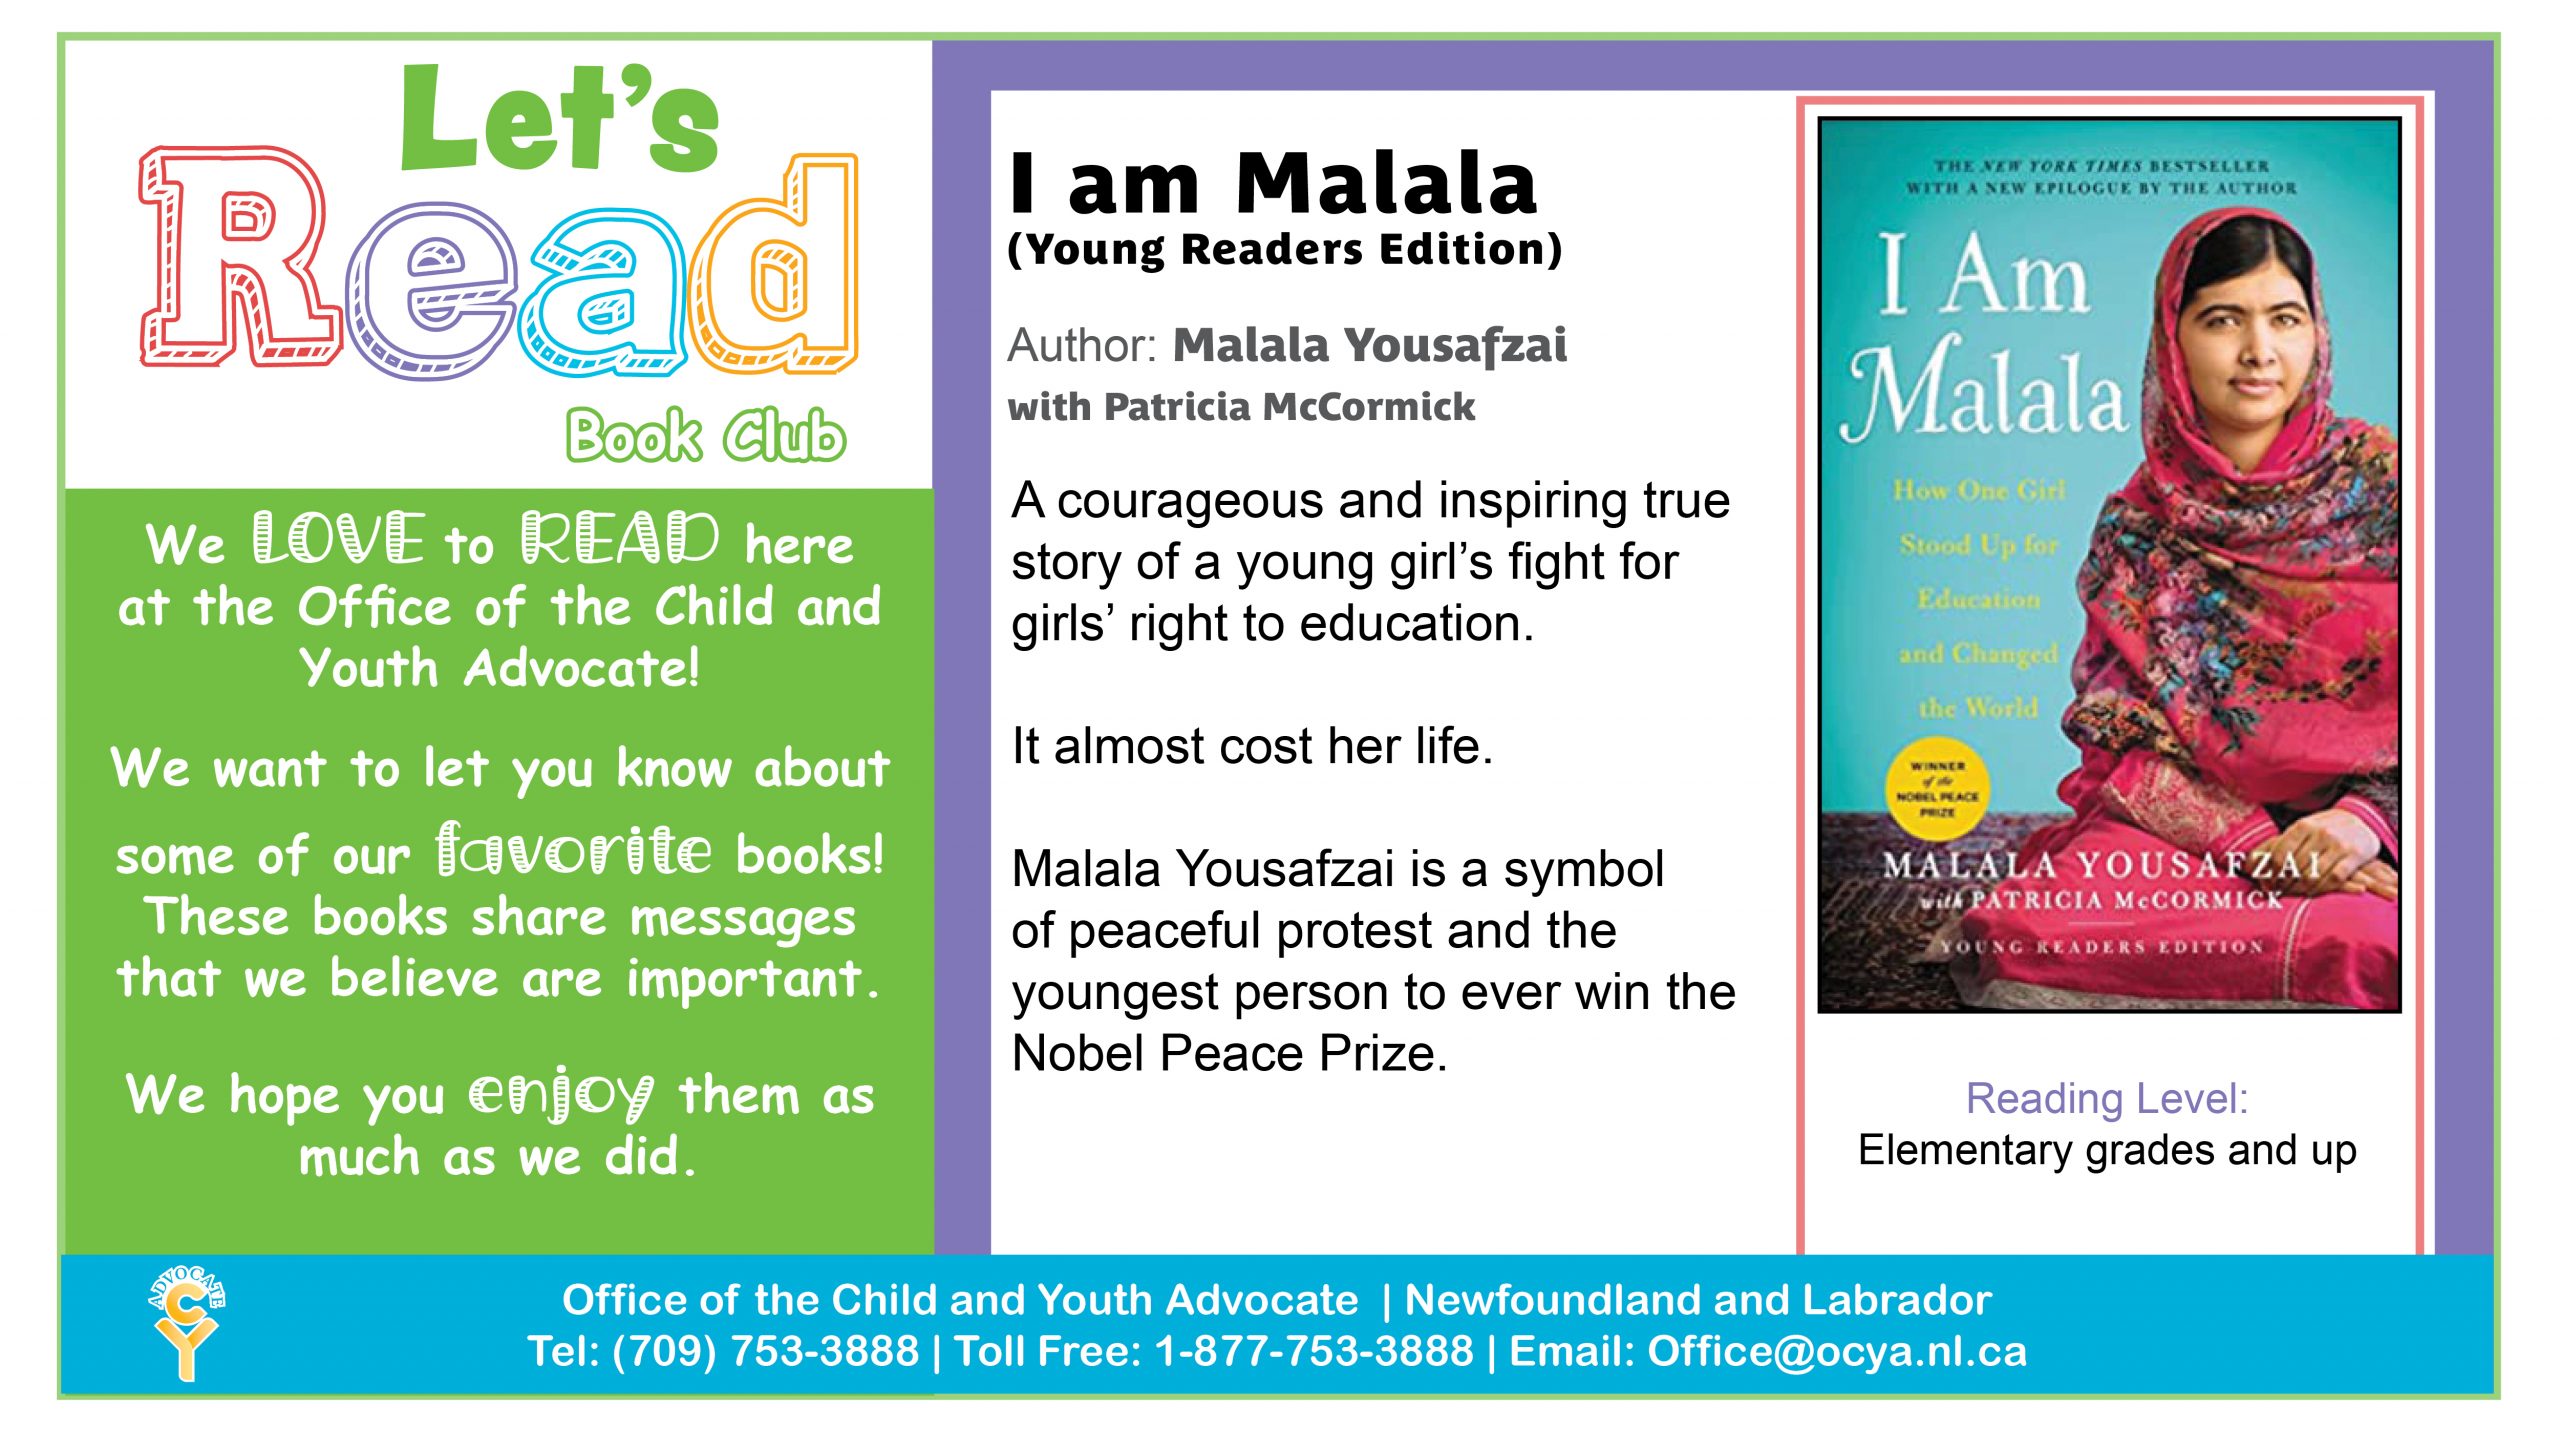 I am Malala (Young Readers Edition), by Malala Yousafzai with Patricia McCormick. A courageous and inspiring true story of a young girl's fight for girls' right to education. It almost cost her life. Malala Yousafzai is a symbol of peaceful protest and the youngest person to ever win the Nobel Peace Prize.